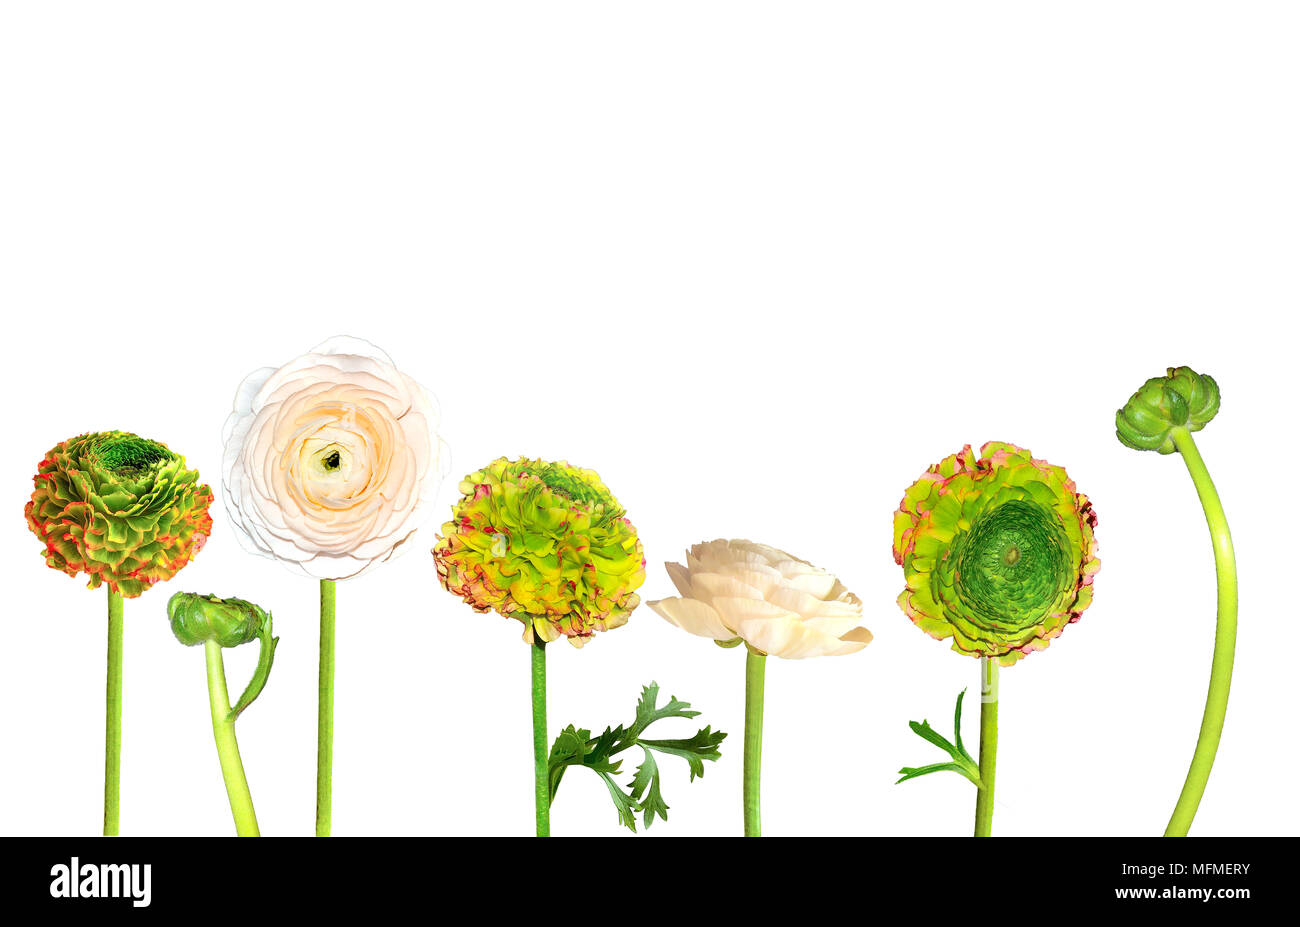 Set of beautiful ranunculus flowers pale creamy and green with red edges of petals isolated on white background with buds and leaves. Floral border, s Stock Photo